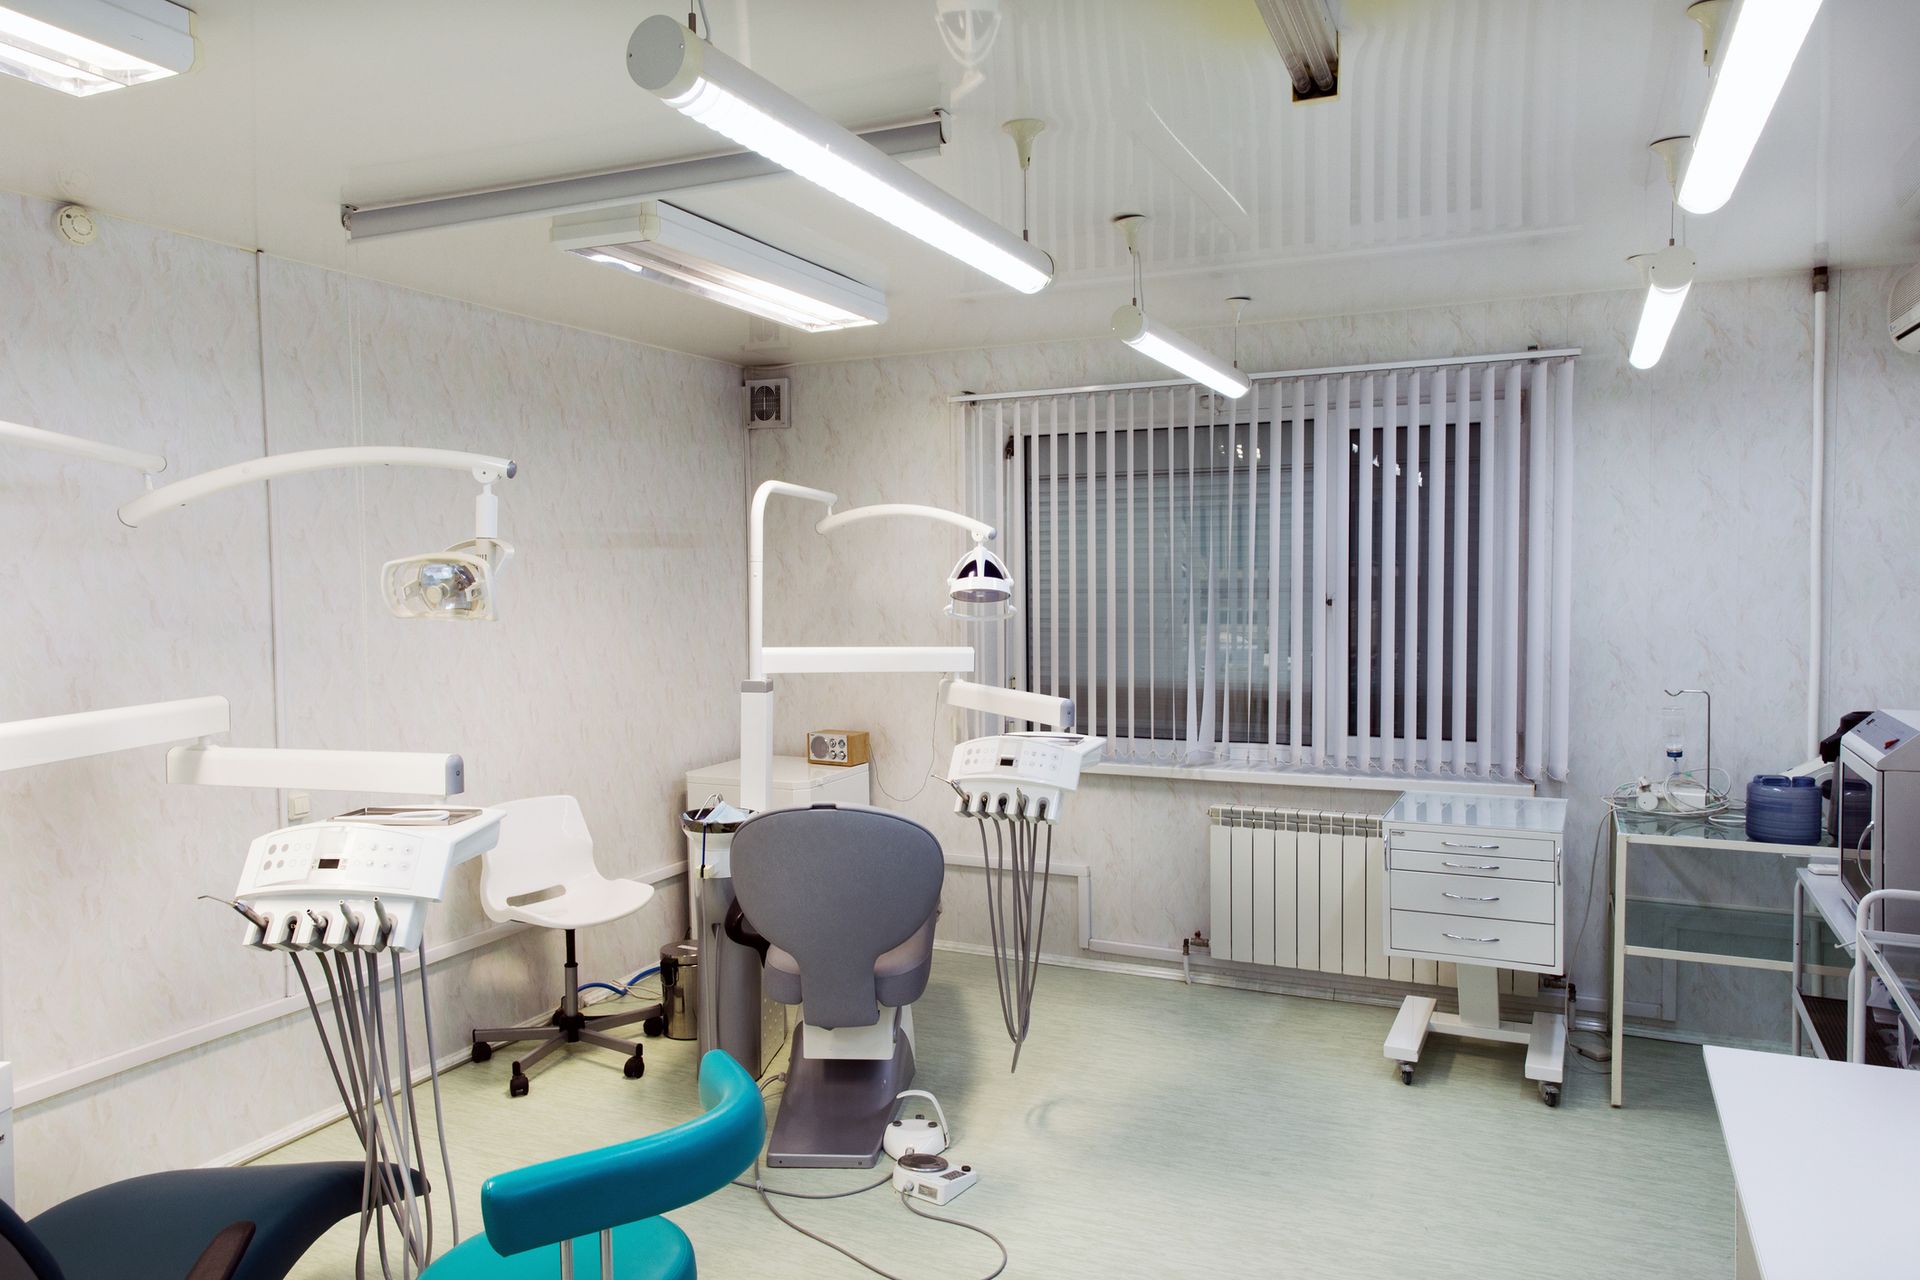 A dental office with a dental chair and dental equipment.